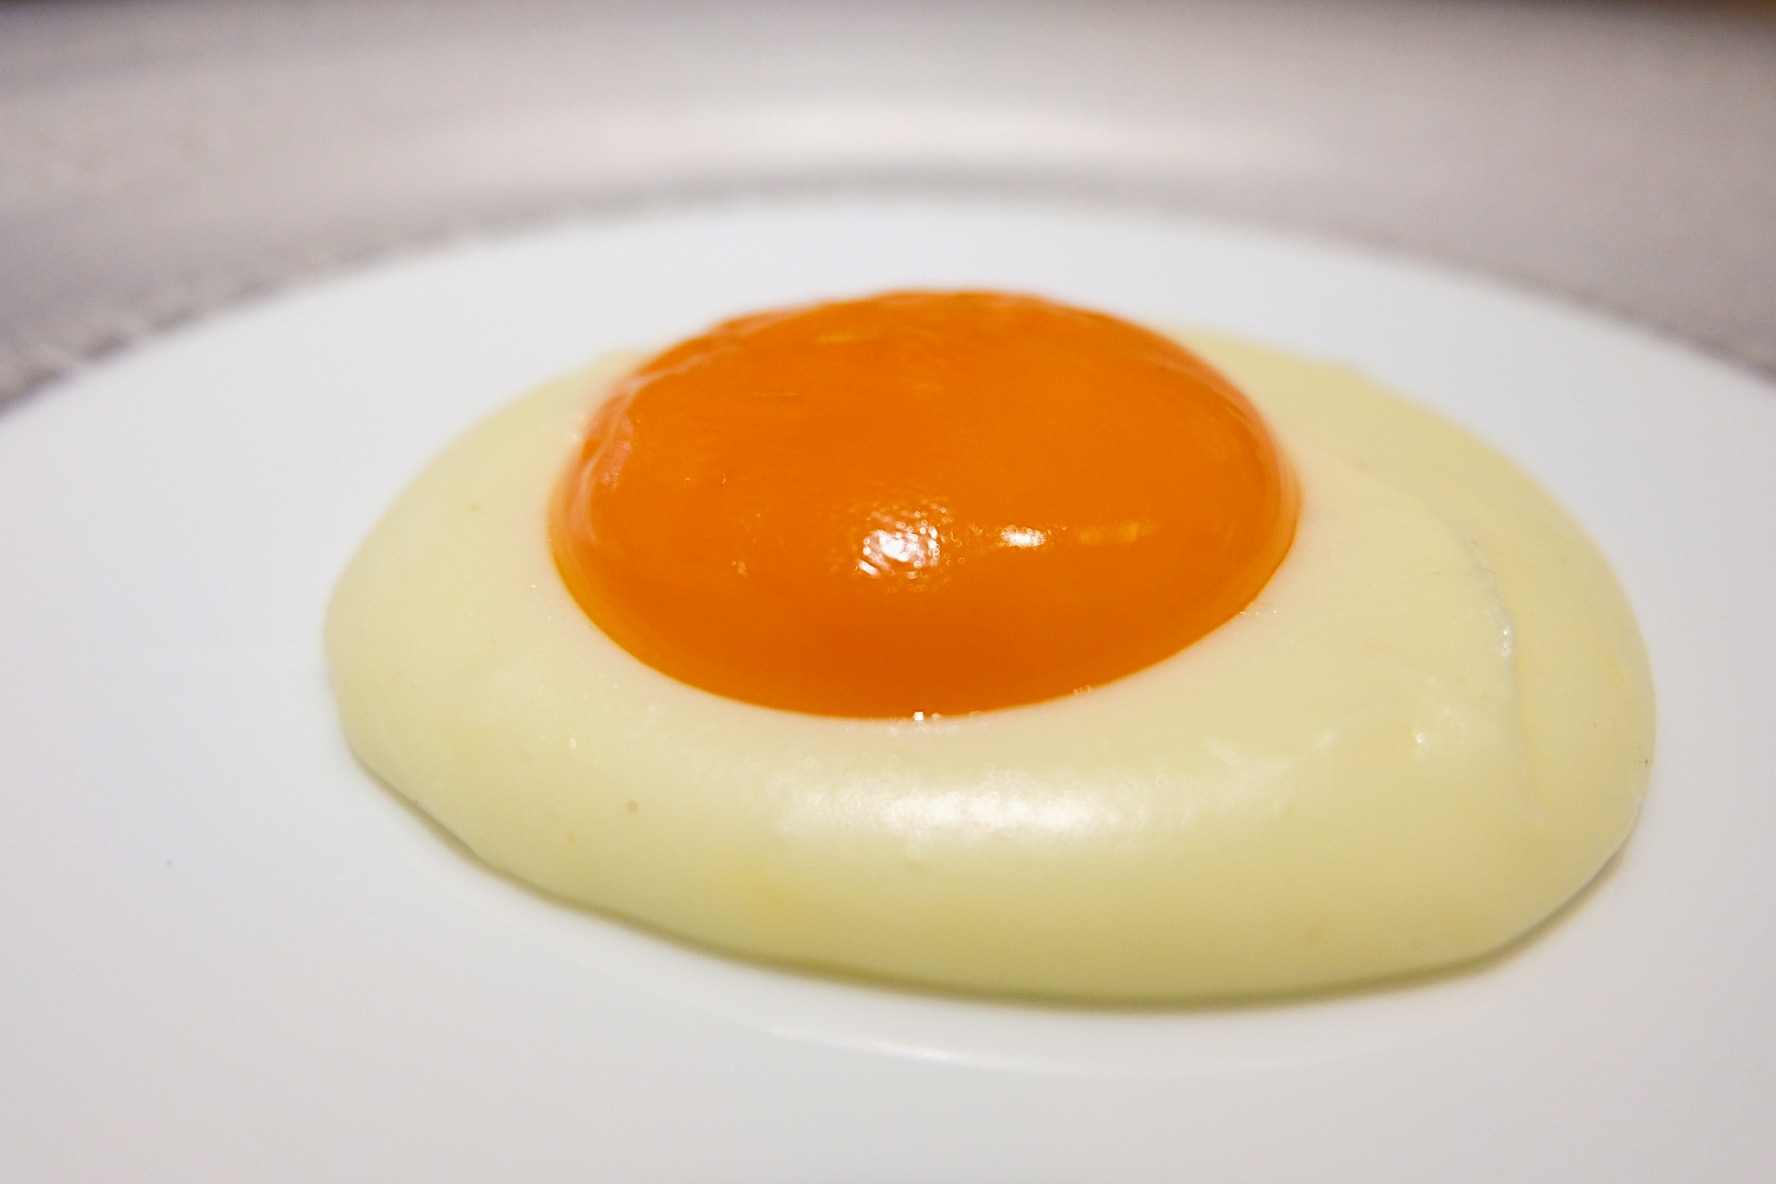 Aligot with tome fraiche and a Yatsugatake egg yolk allows the product's decadence to shine